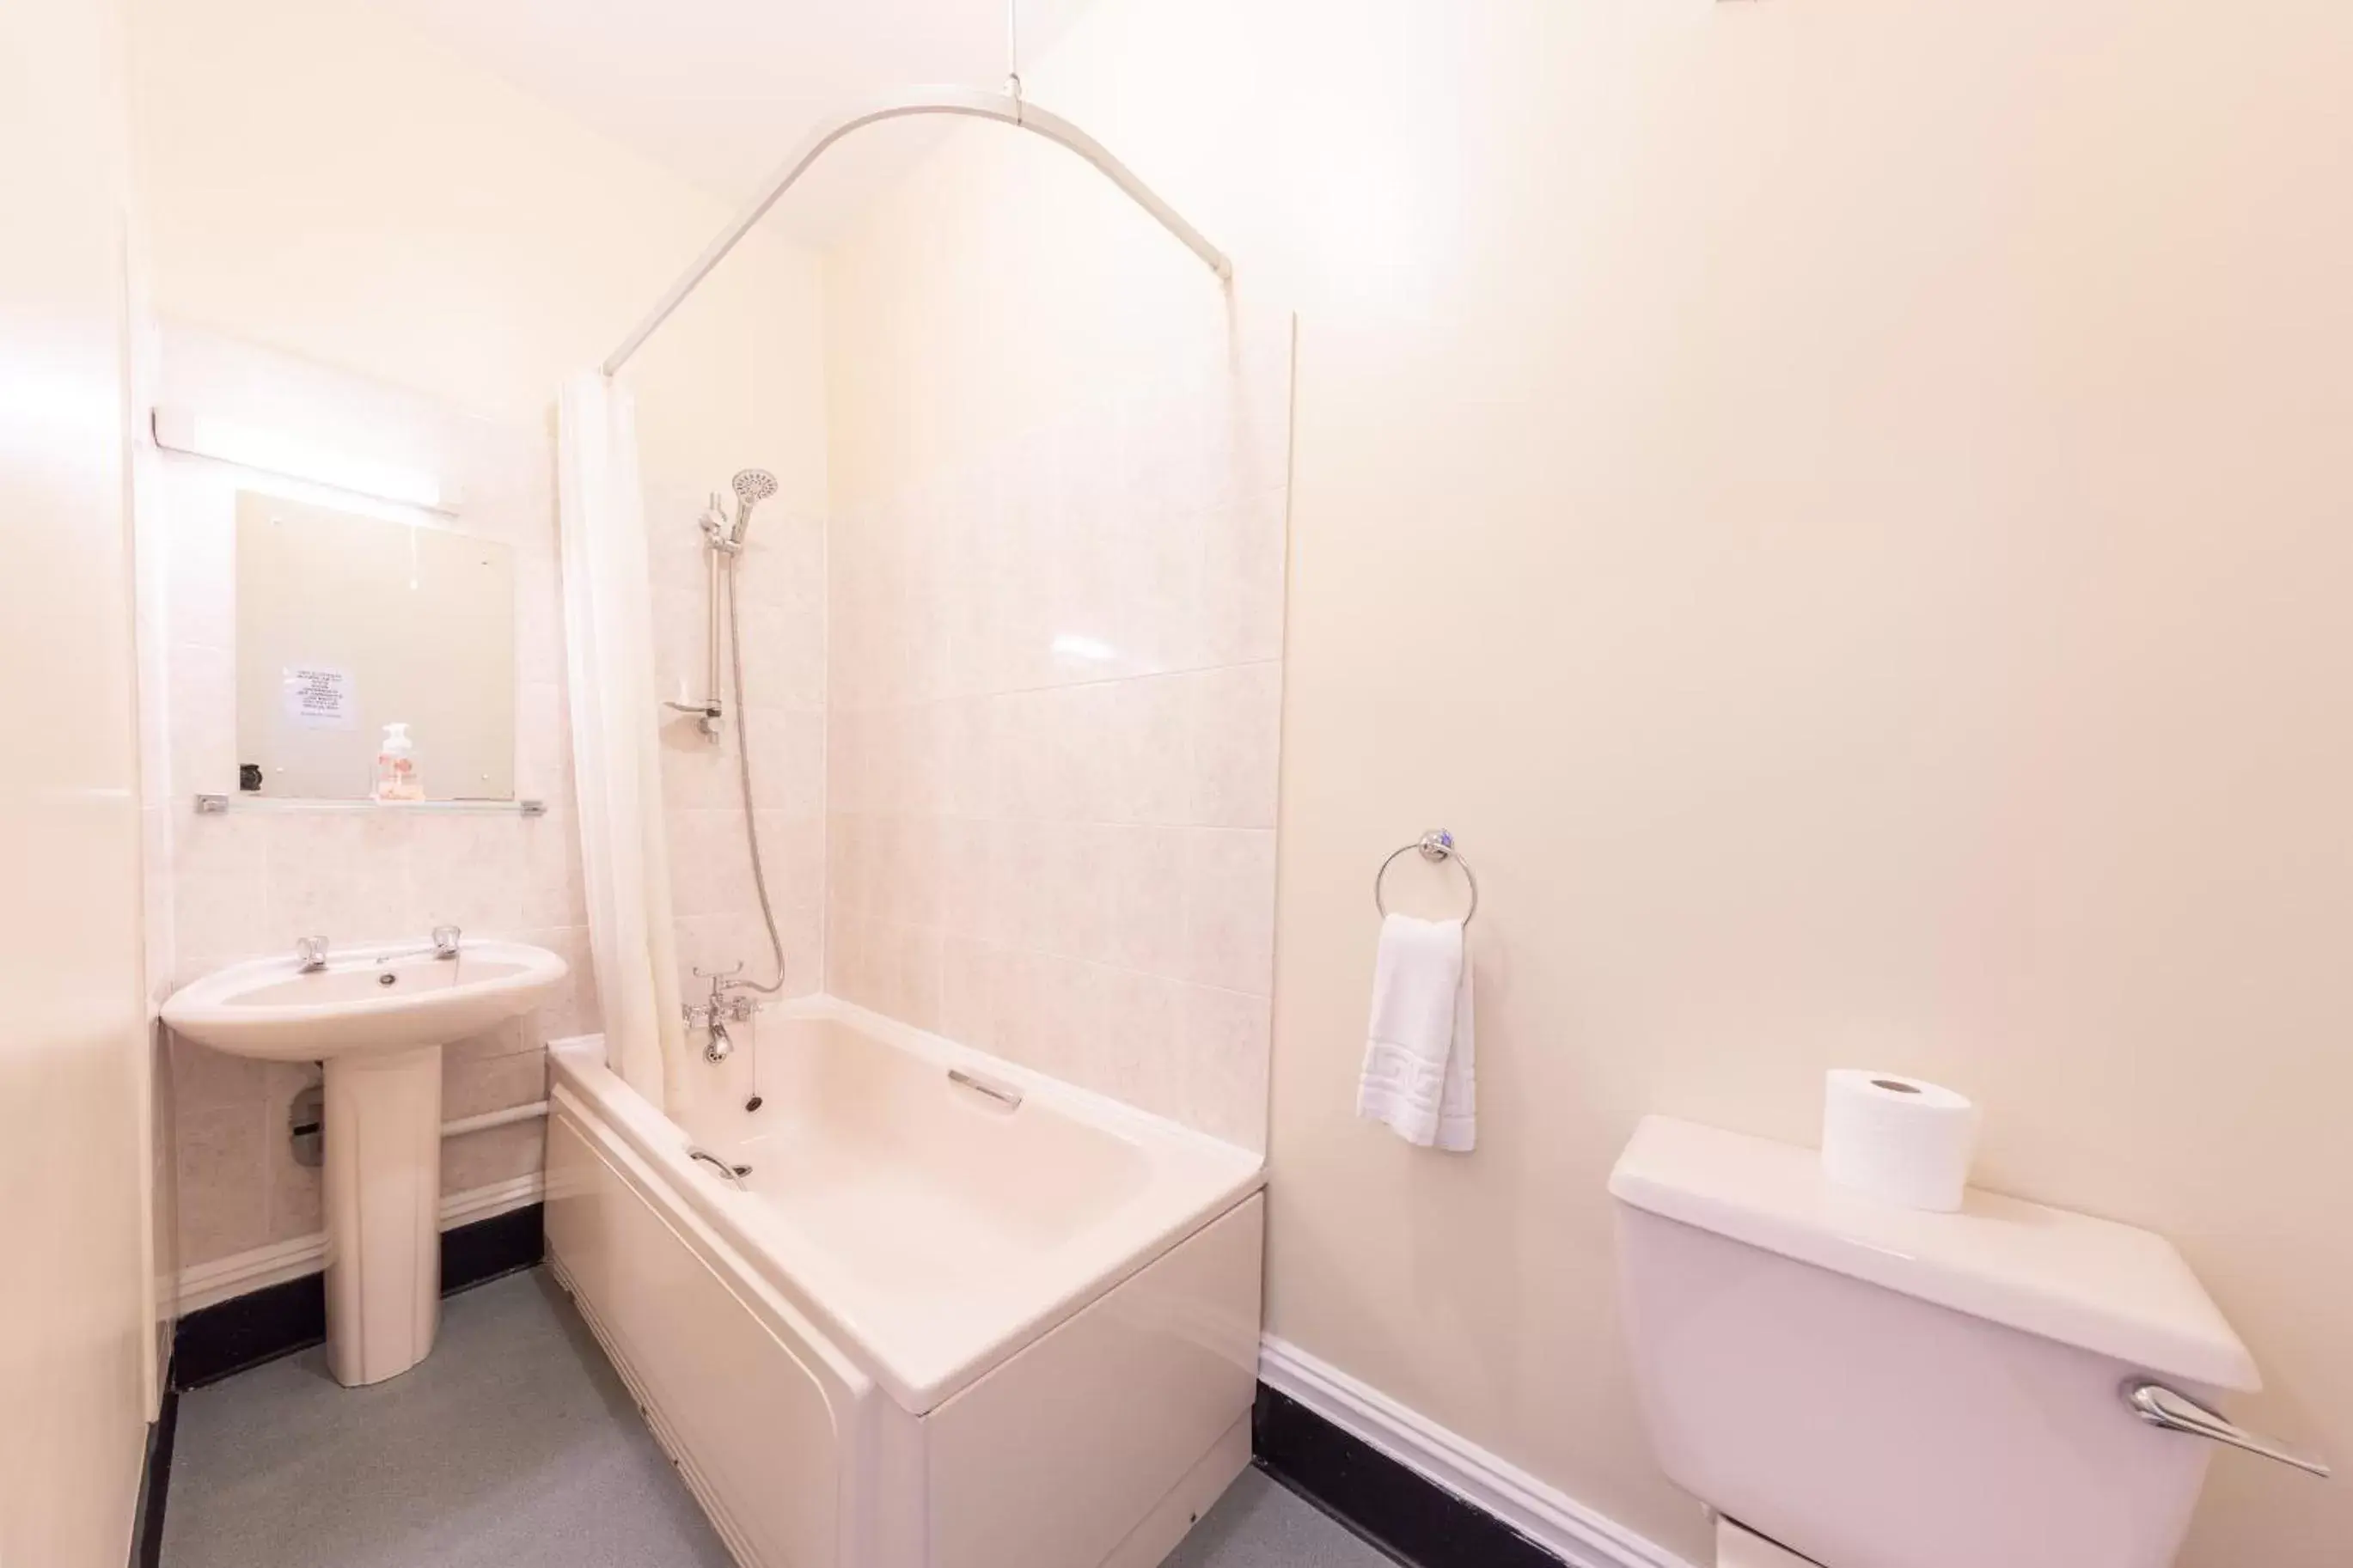 Bathroom in The Clee Hotel - Cleethorpes, Grimsby, Lincolnshire